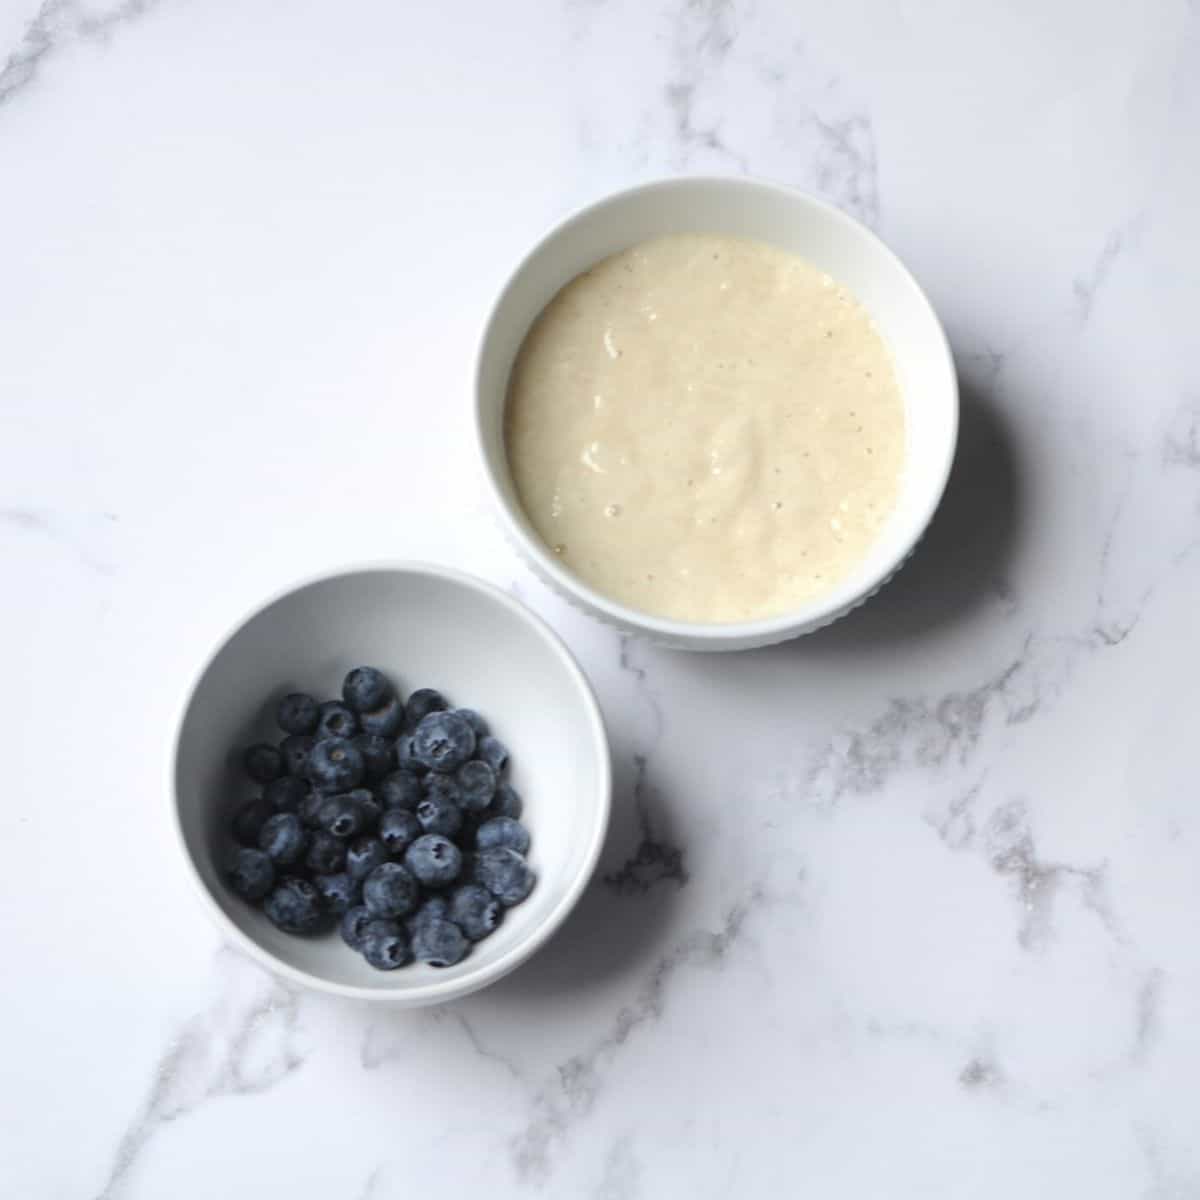 Sourdough Starter in a bowl next to a bowl of Blueberries